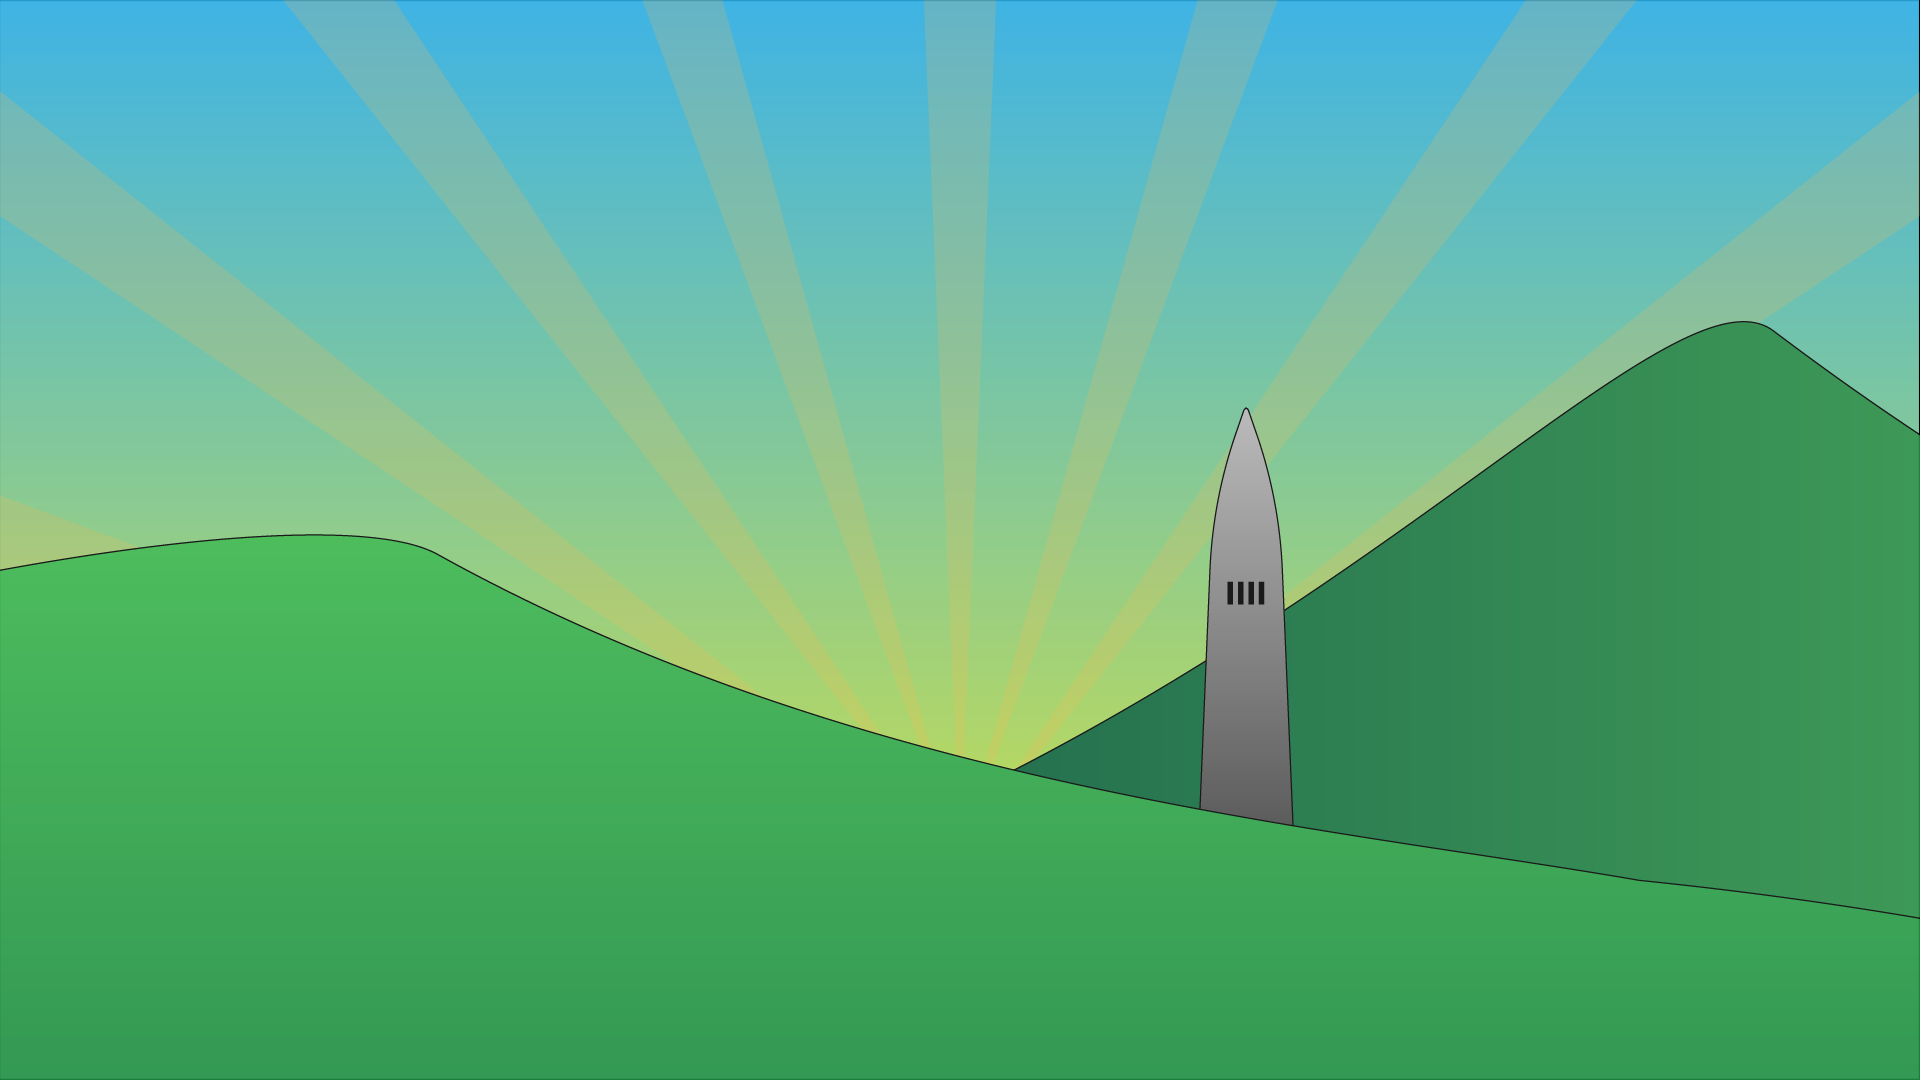 An illustration of two green mountains with the Bennington Battle Monument poking out between them. The sun is rising behind the mountains.